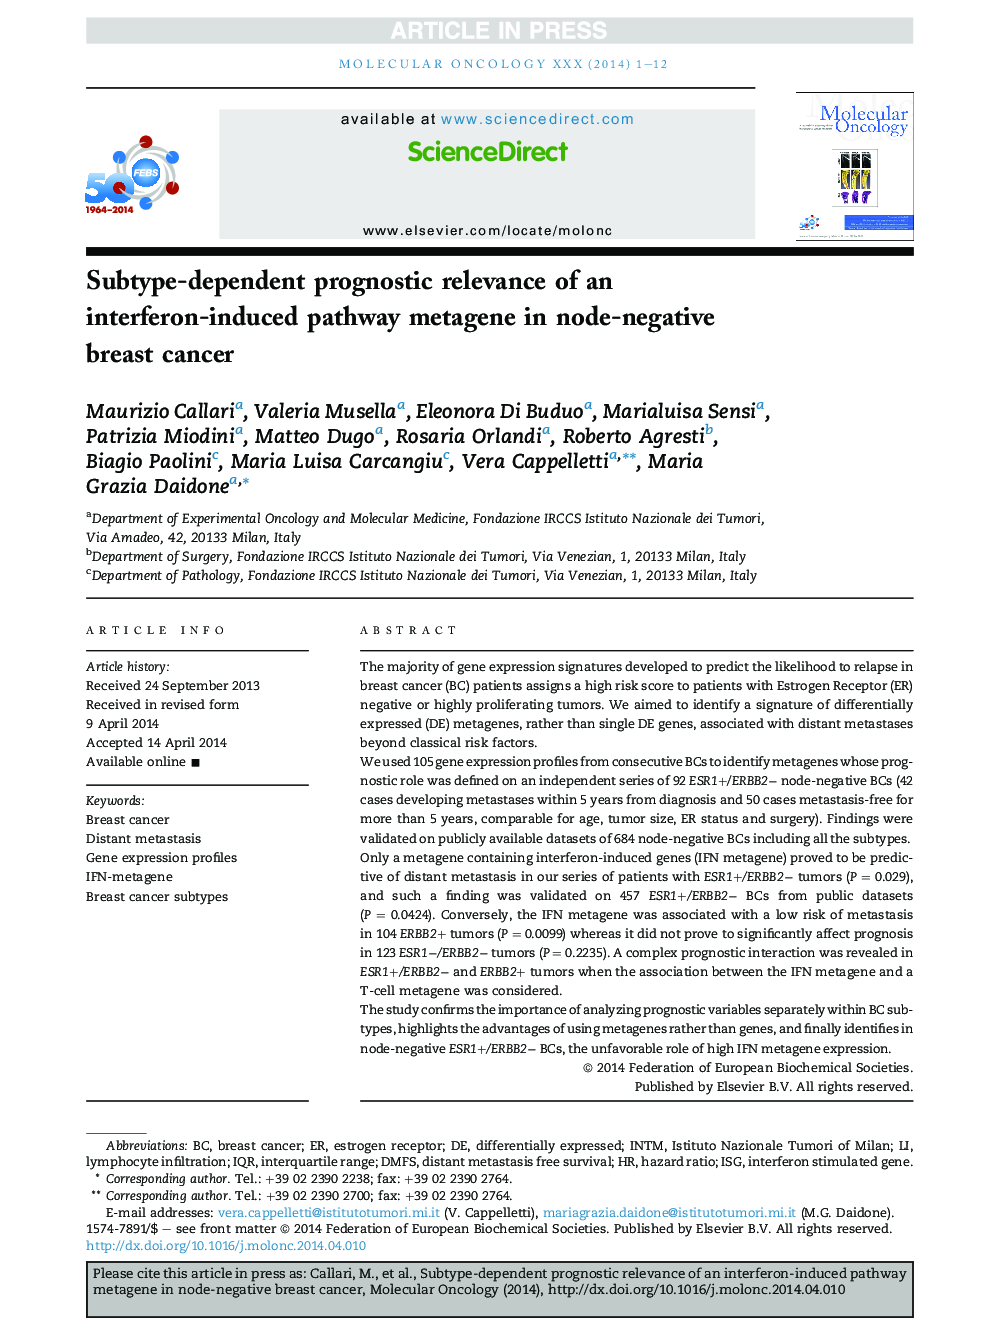 Subtype-dependent prognostic relevance of an interferon-induced pathway metagene in node-negative breast cancer